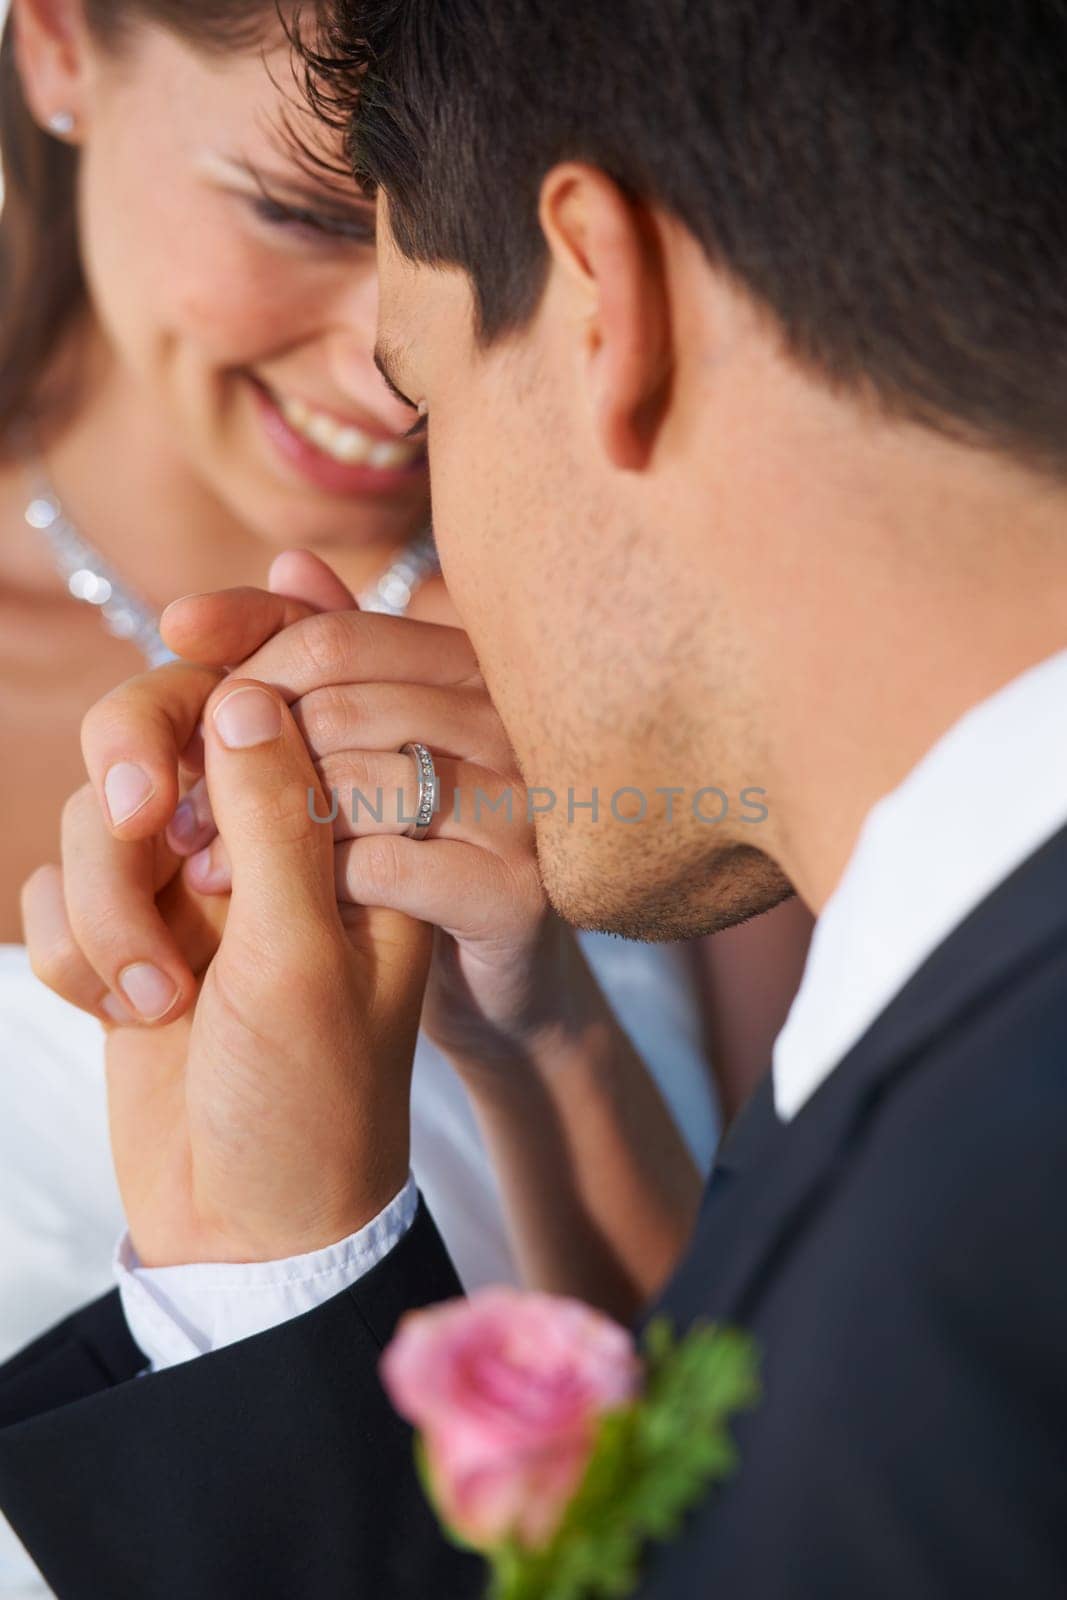 Couple, wedding ring and hand in marriage with bride and smile at celebration and trust event. Flower, loyalty and care with romance and holding hands with love and commitment with woman and man.